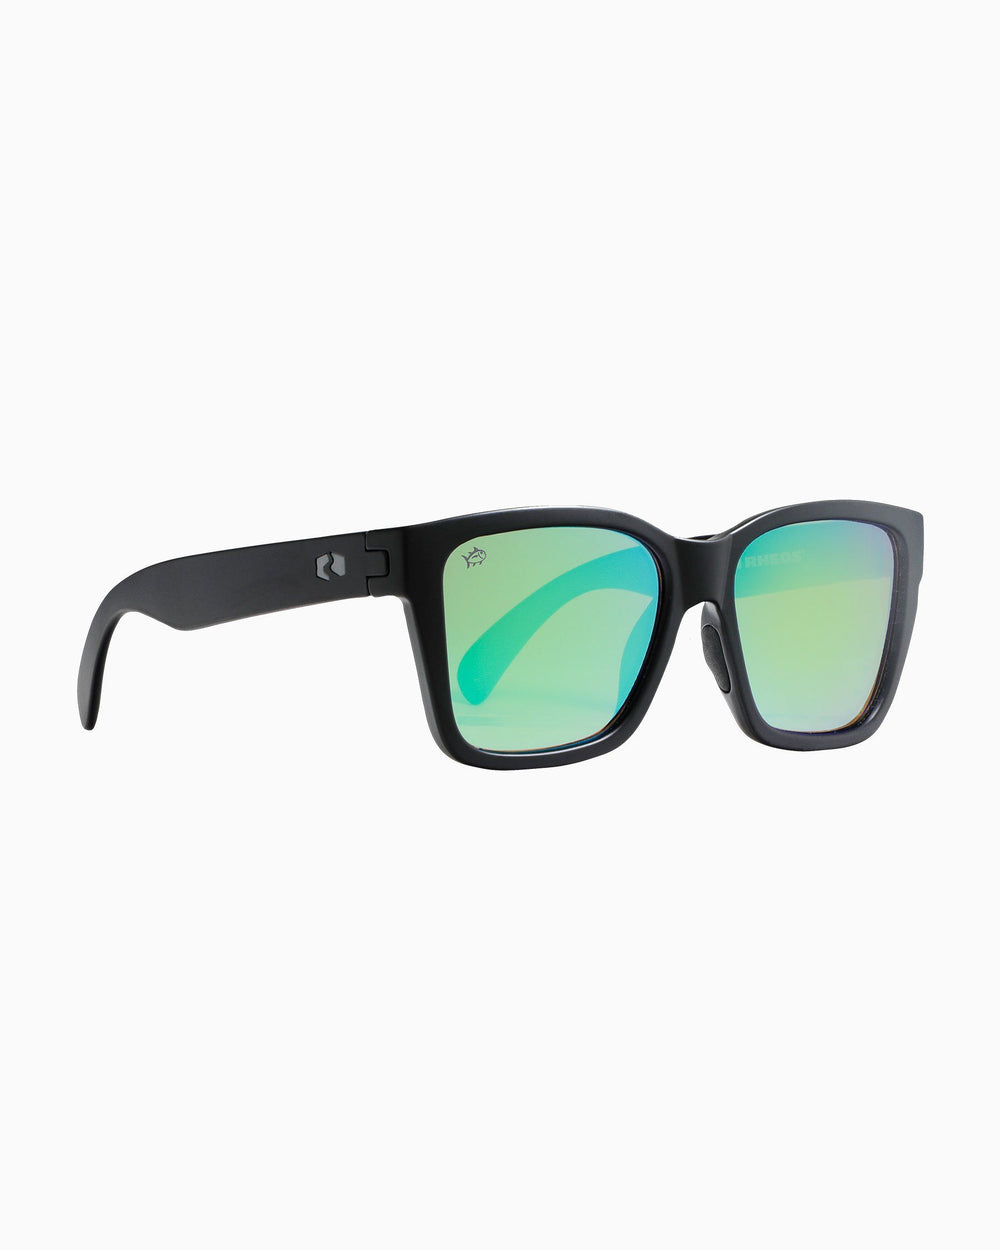 The side of the Rheos Edistos Sunglasses by Southern Tide - Gunmetal Emerald